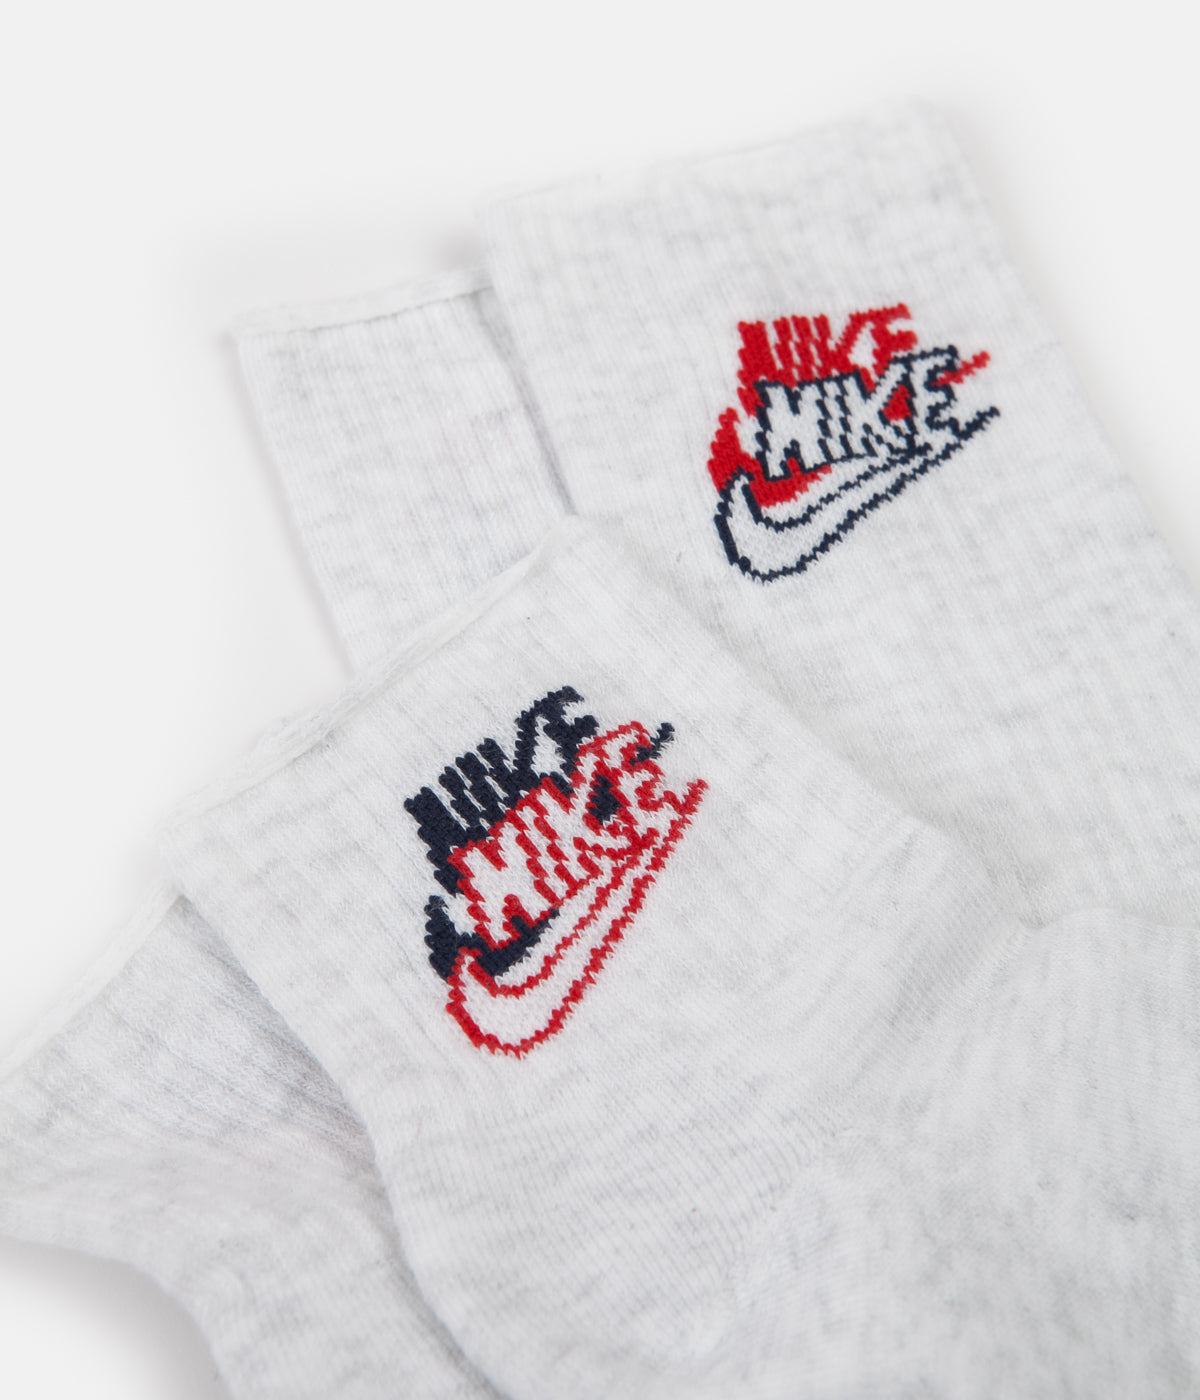 Nike Chaussettes Heritage New Vintage 2-Pack - Blanc/Rouge